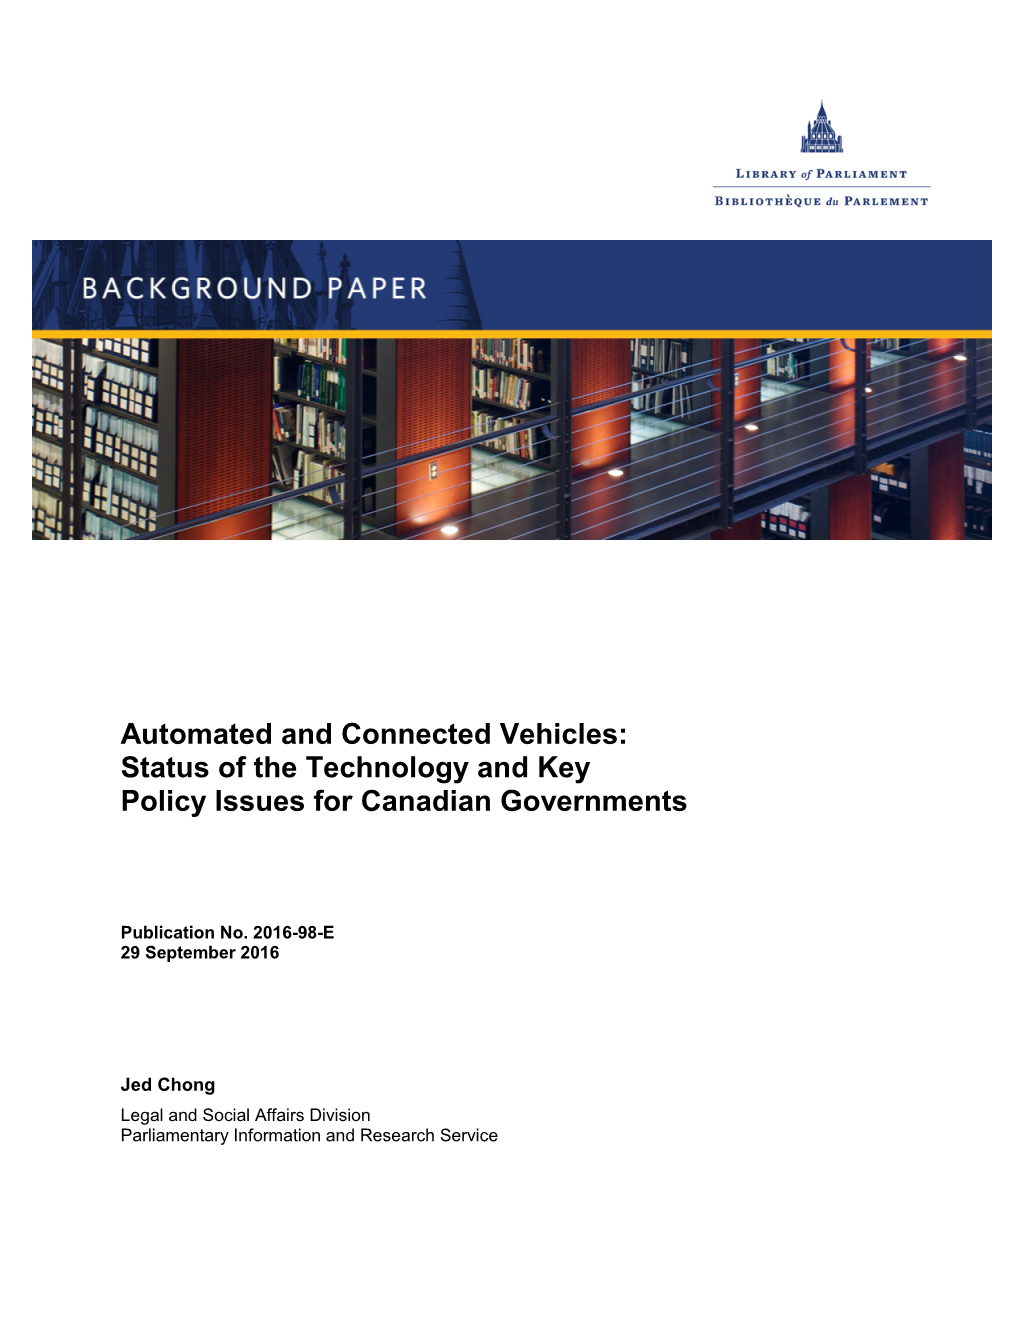 Automated and Connected Vehicles: Status of the Technology and Key Policy Issues for Canadian Governments